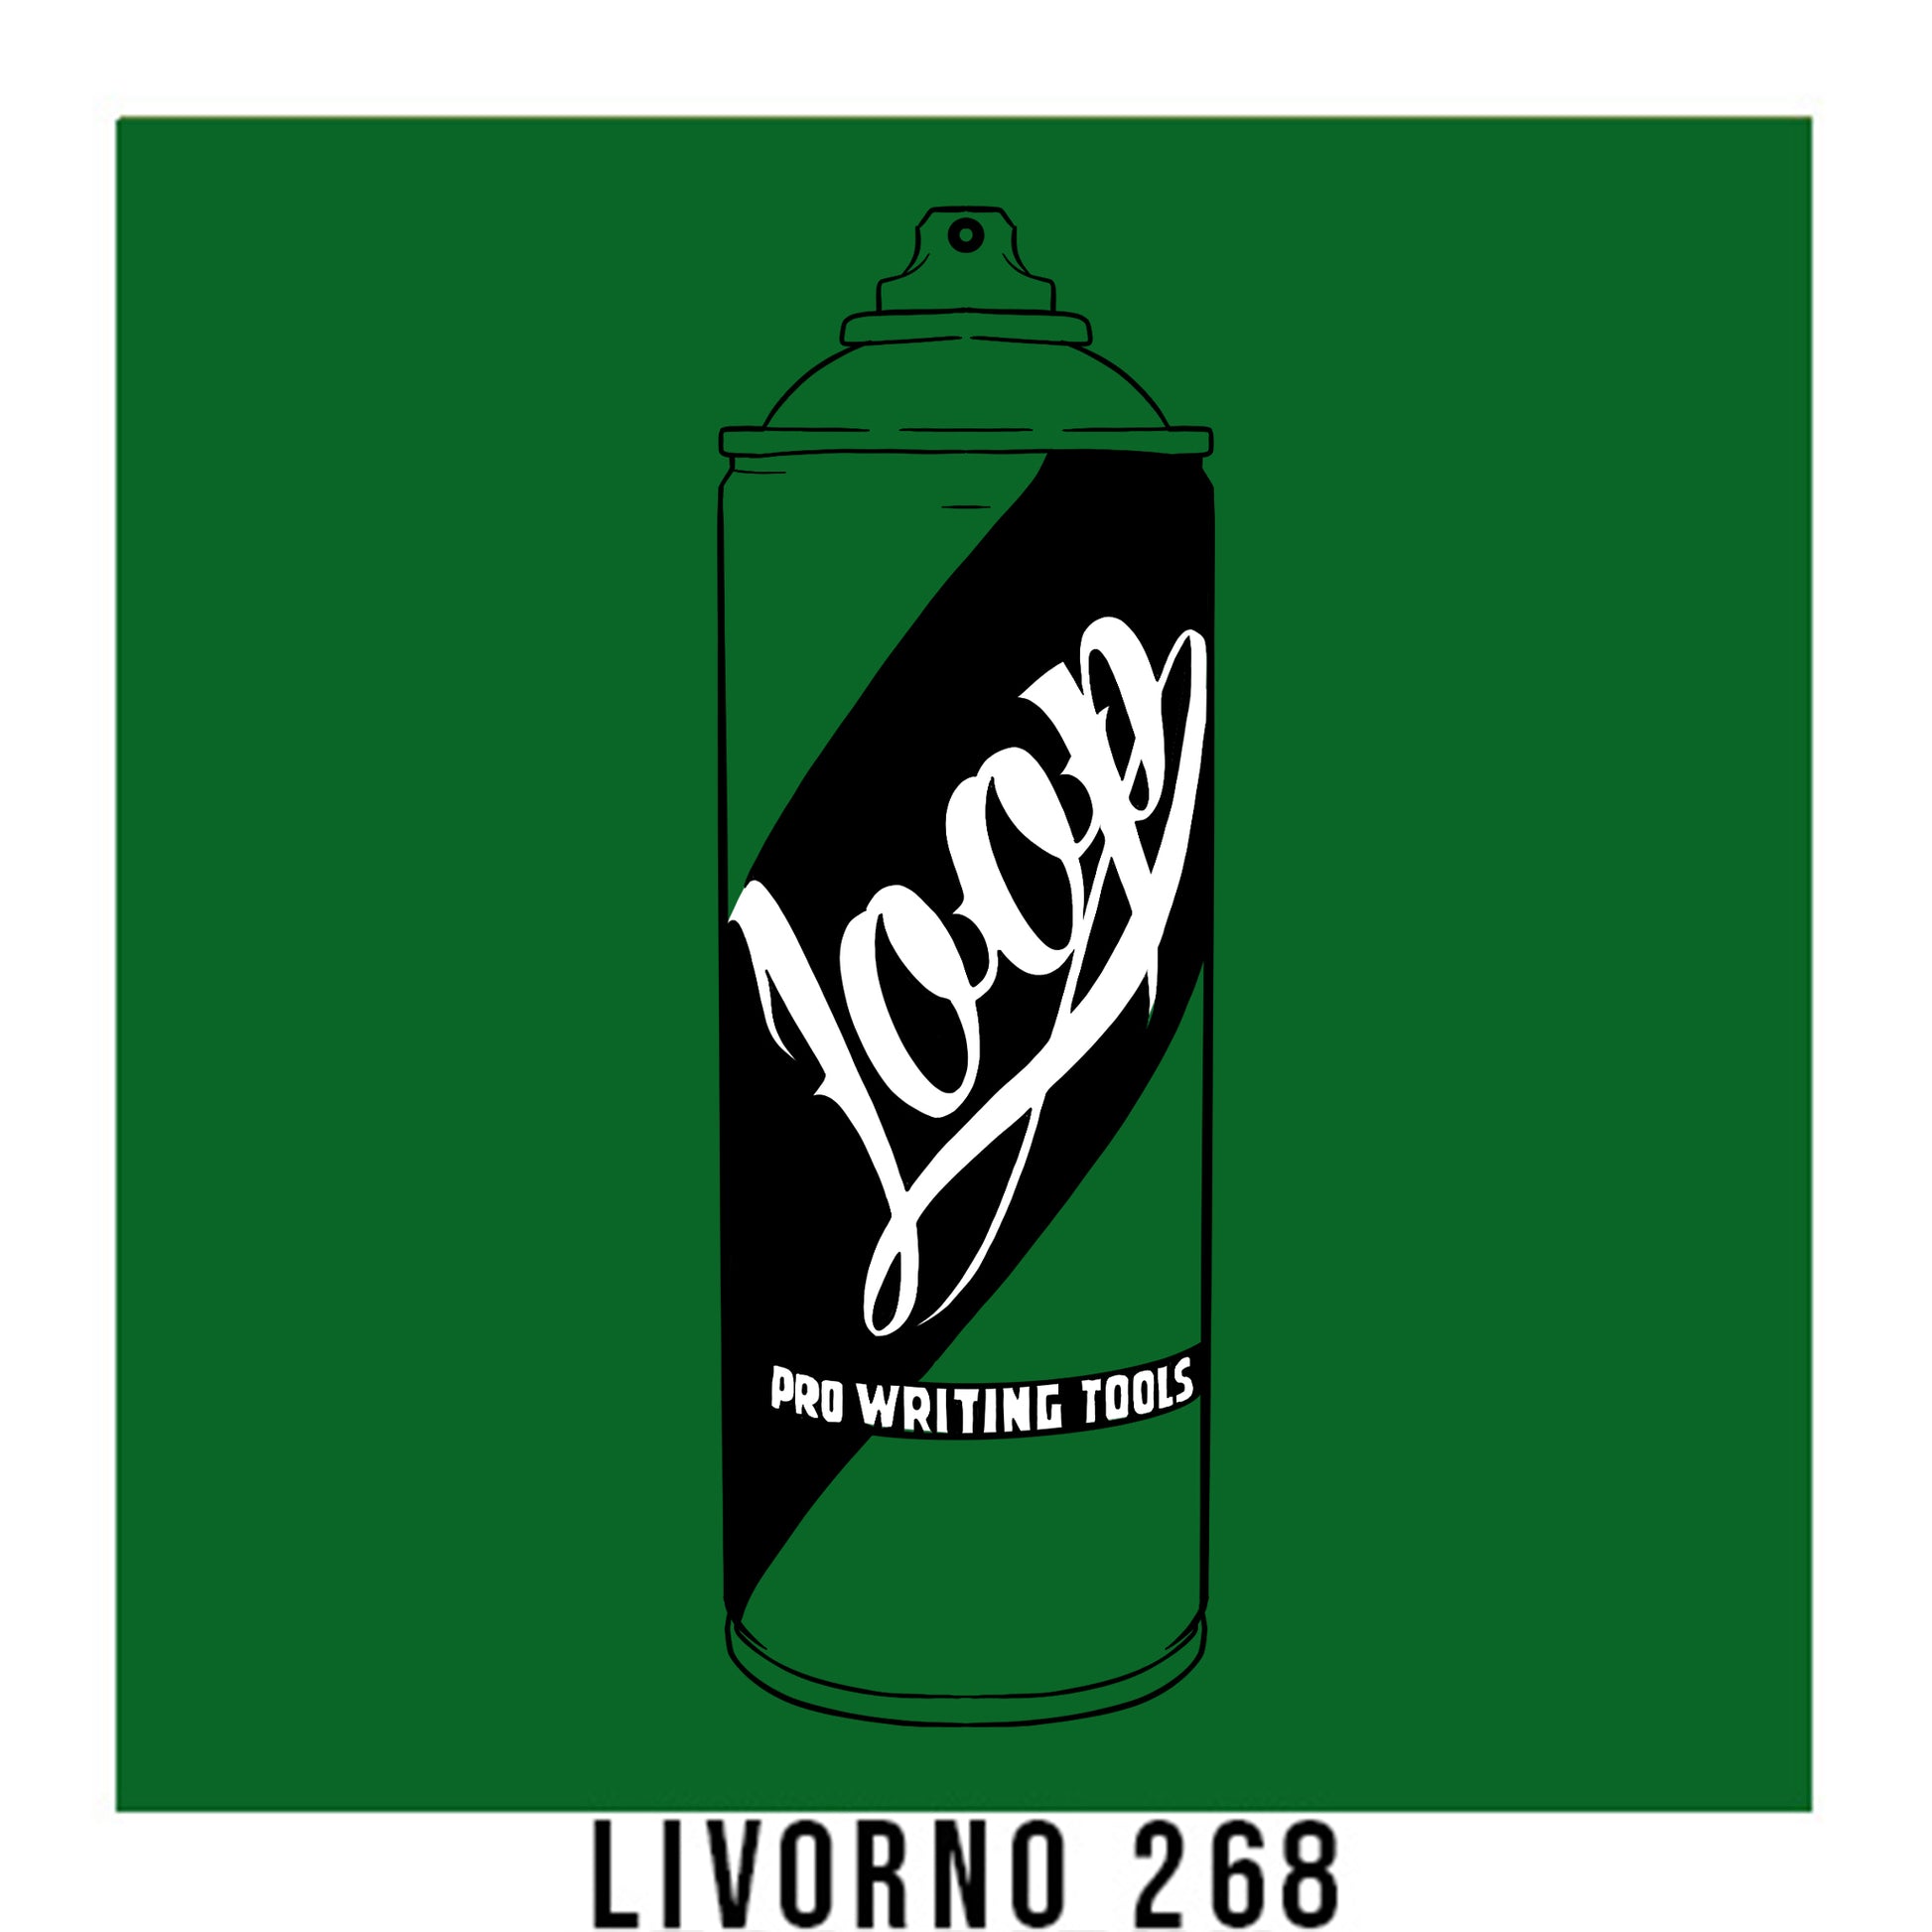 A black outline drawing of a Green spray paint can with the word "Loop" written on the face in script. The background is a color swatch of the same  Green with a white border with the words "268 Livorno" at the bottom.